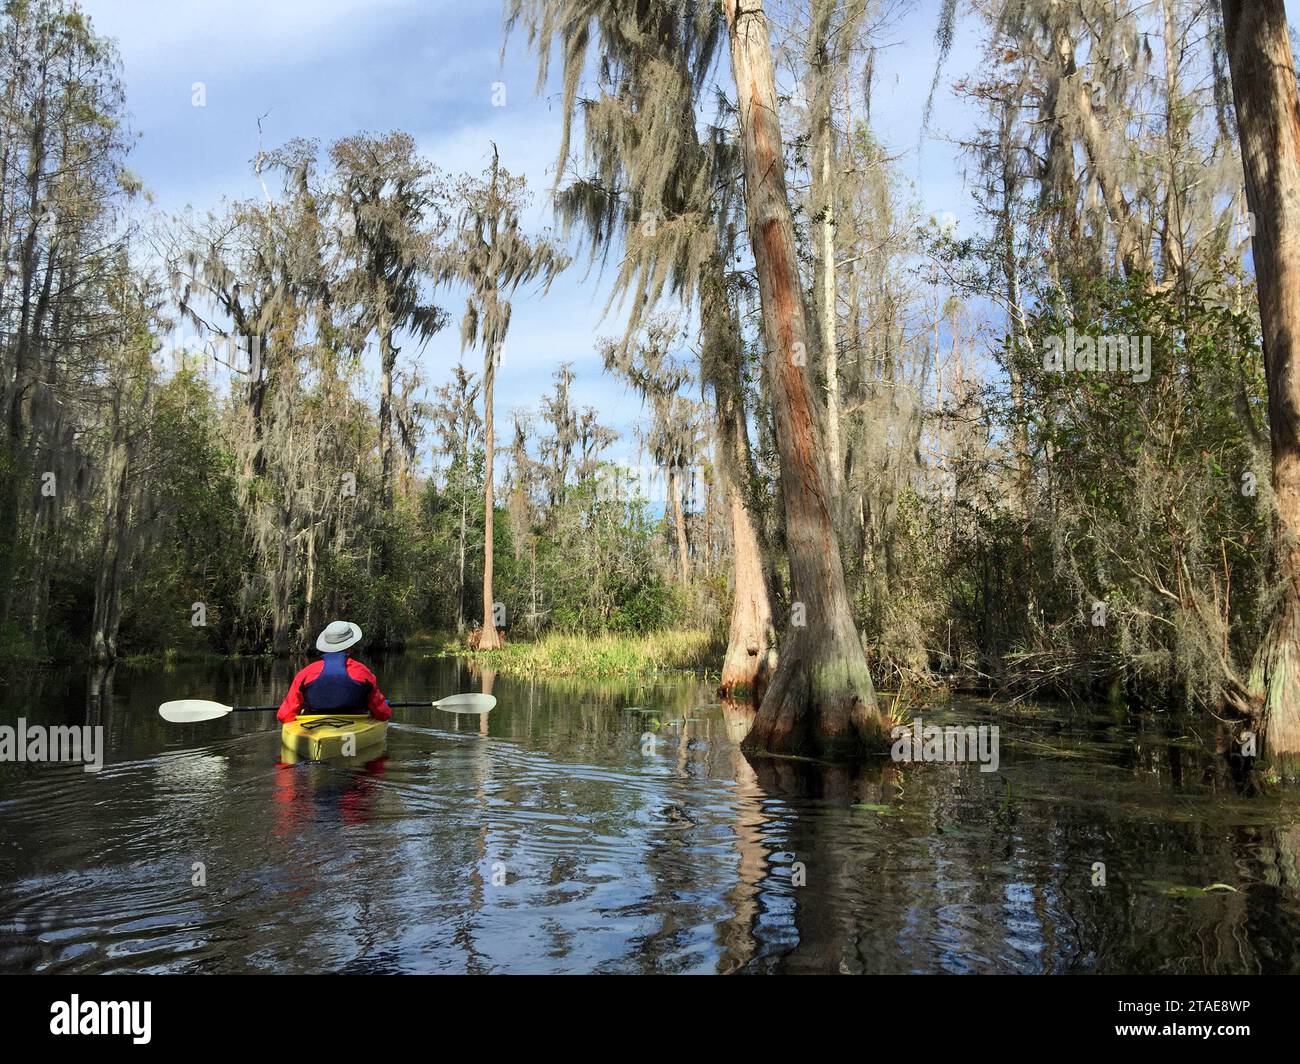 An active senior kayaking in Okefenokee National Wildlife Refuge, North America's largest blackwater swamp habitat and home to diverse wildlife. Stock Photo